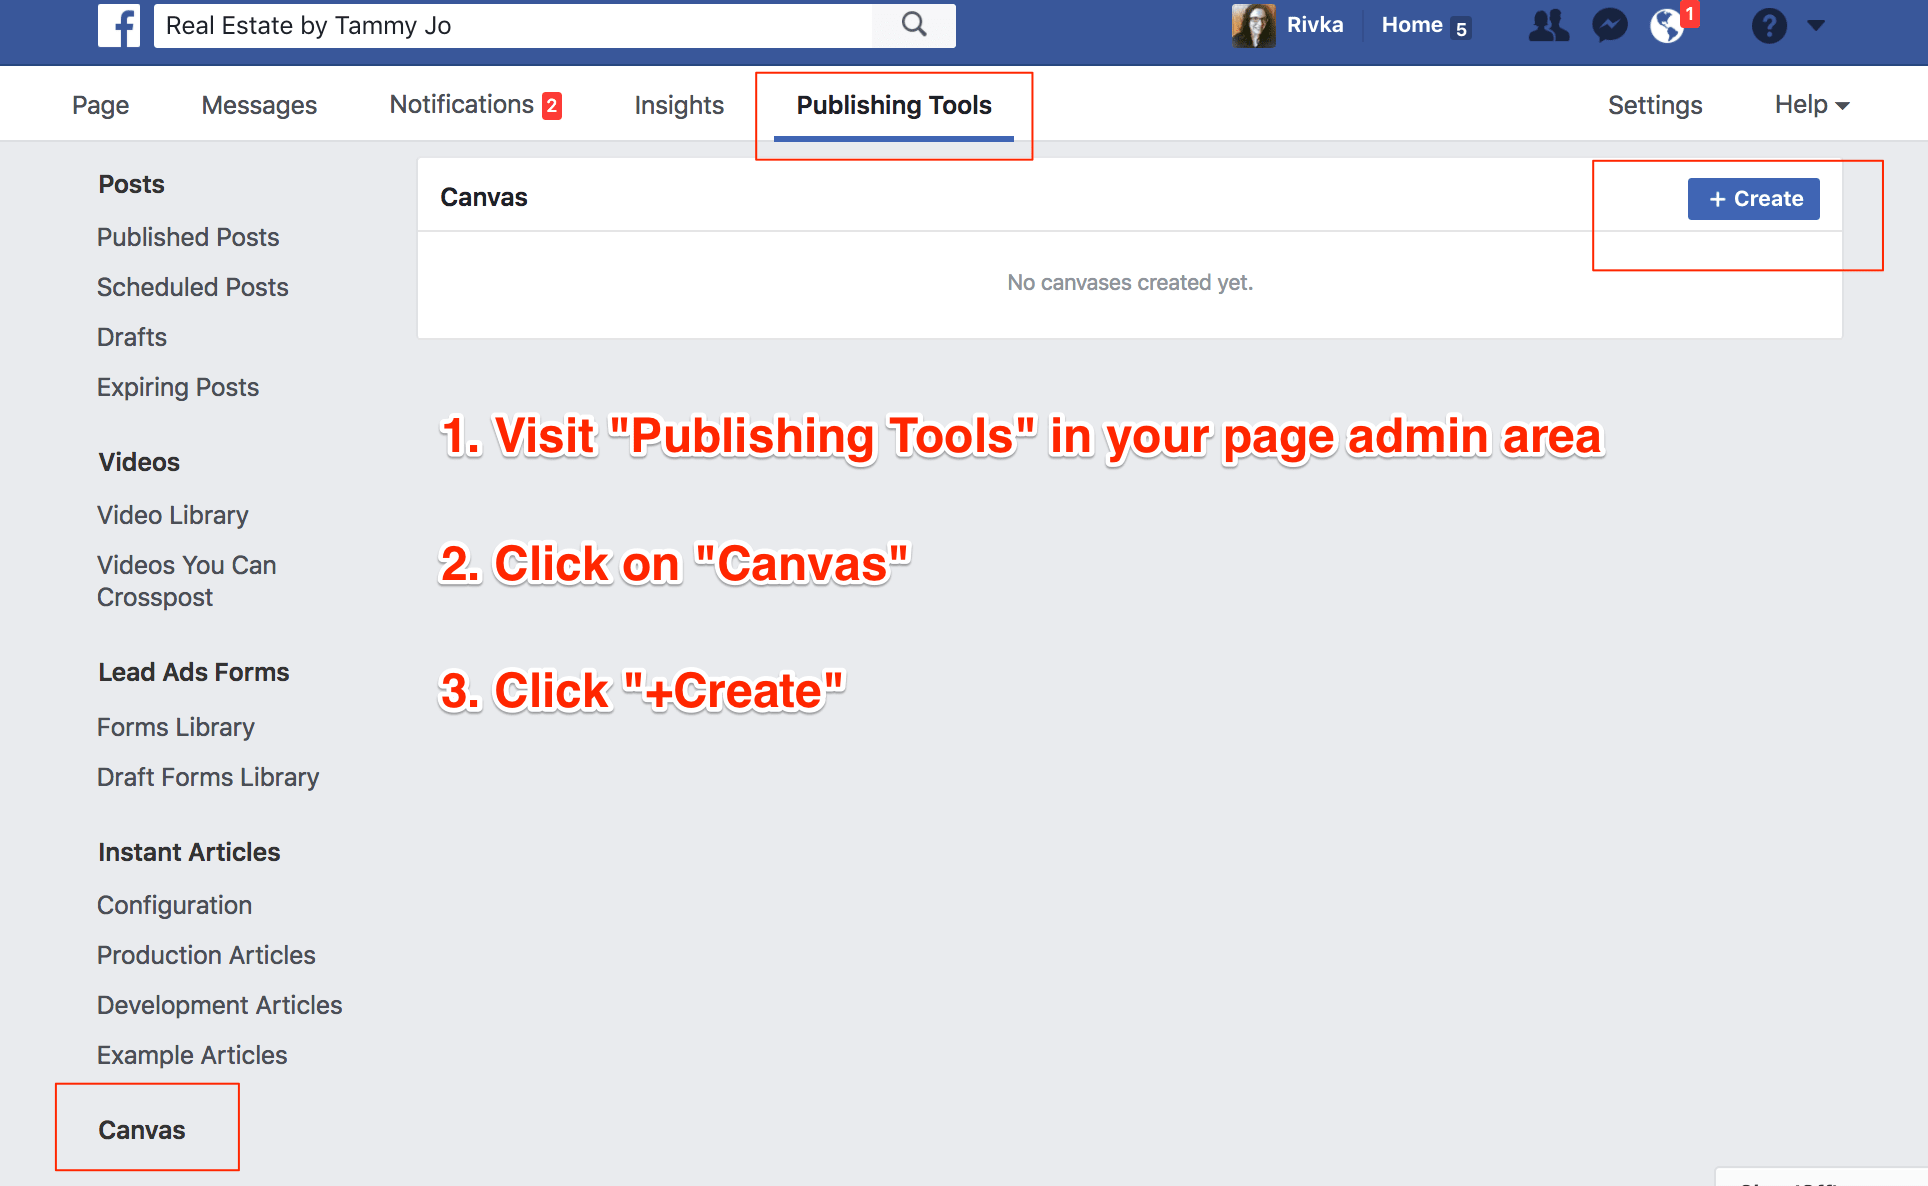 How to get started using Facebook canvas